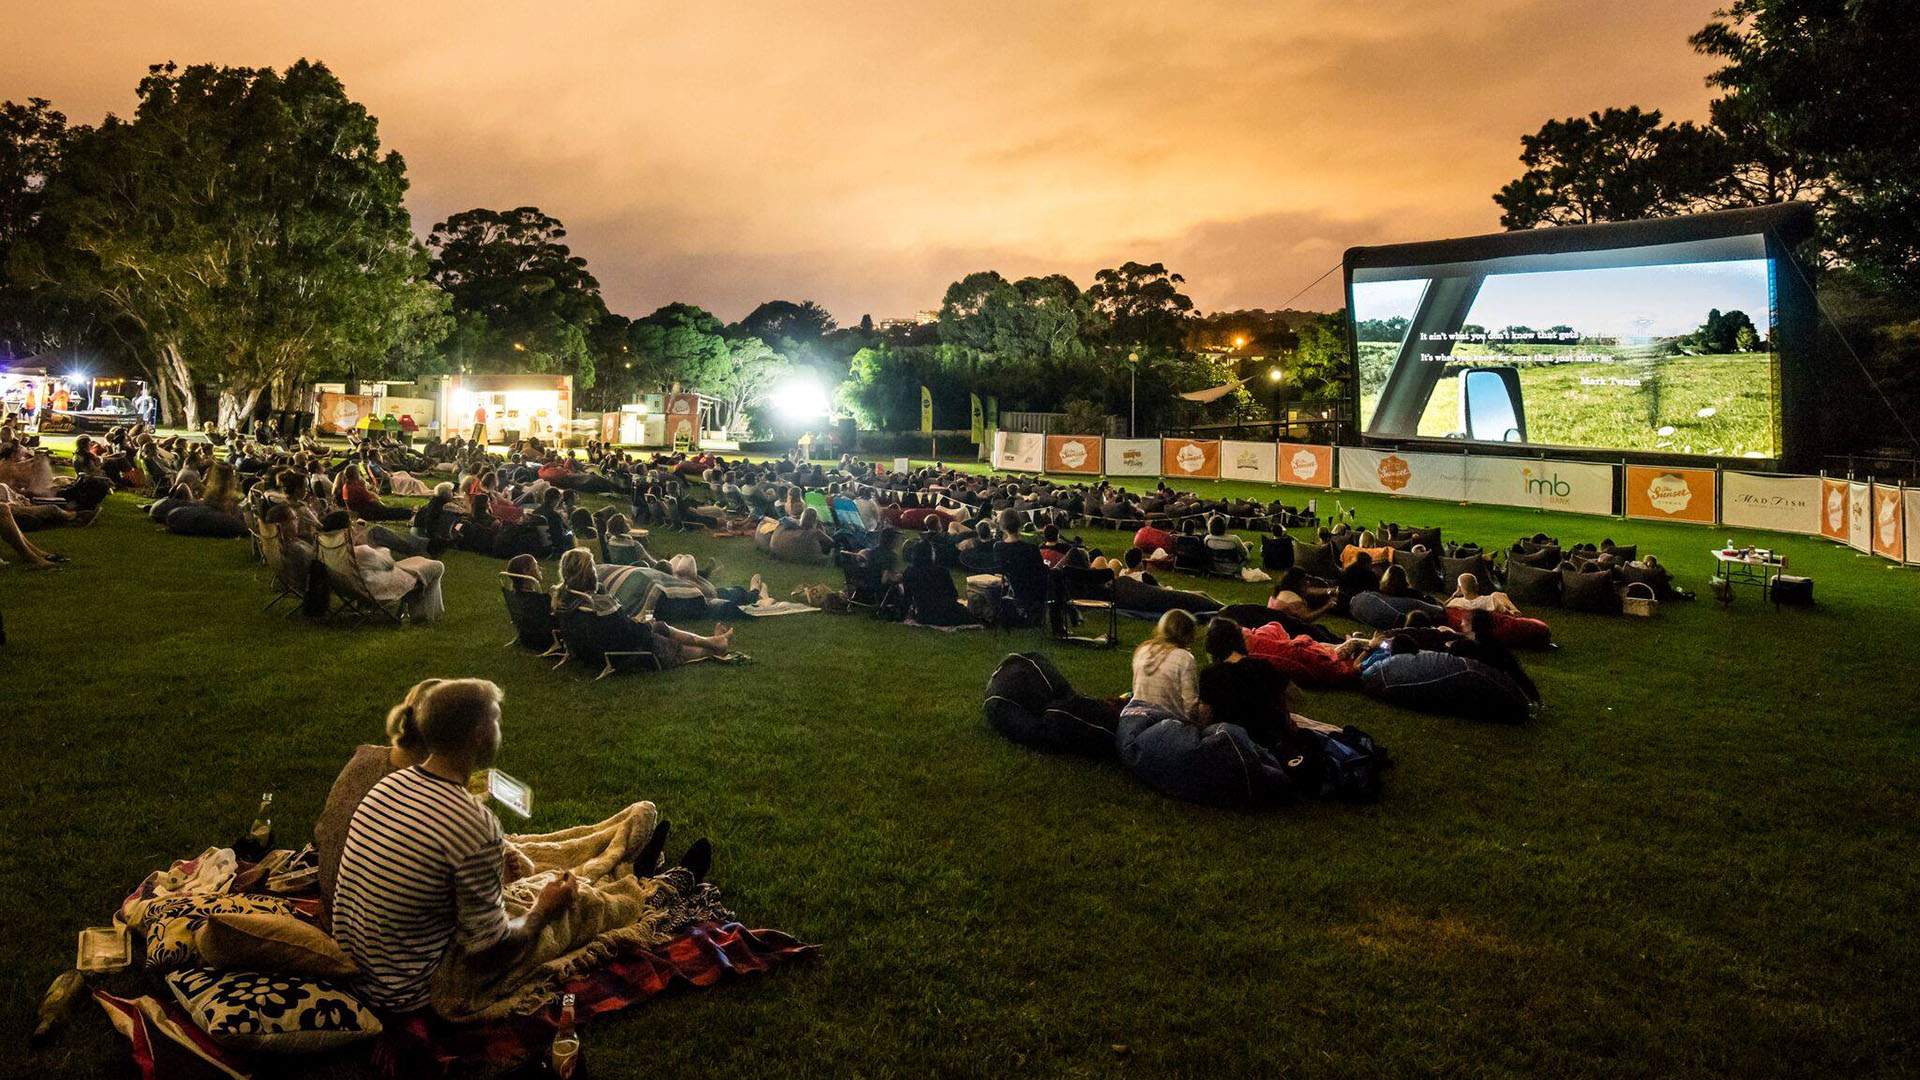 A New Outdoor Cinema Is Coming to Brisbane's Mt Coot-tha Botanic Gardens